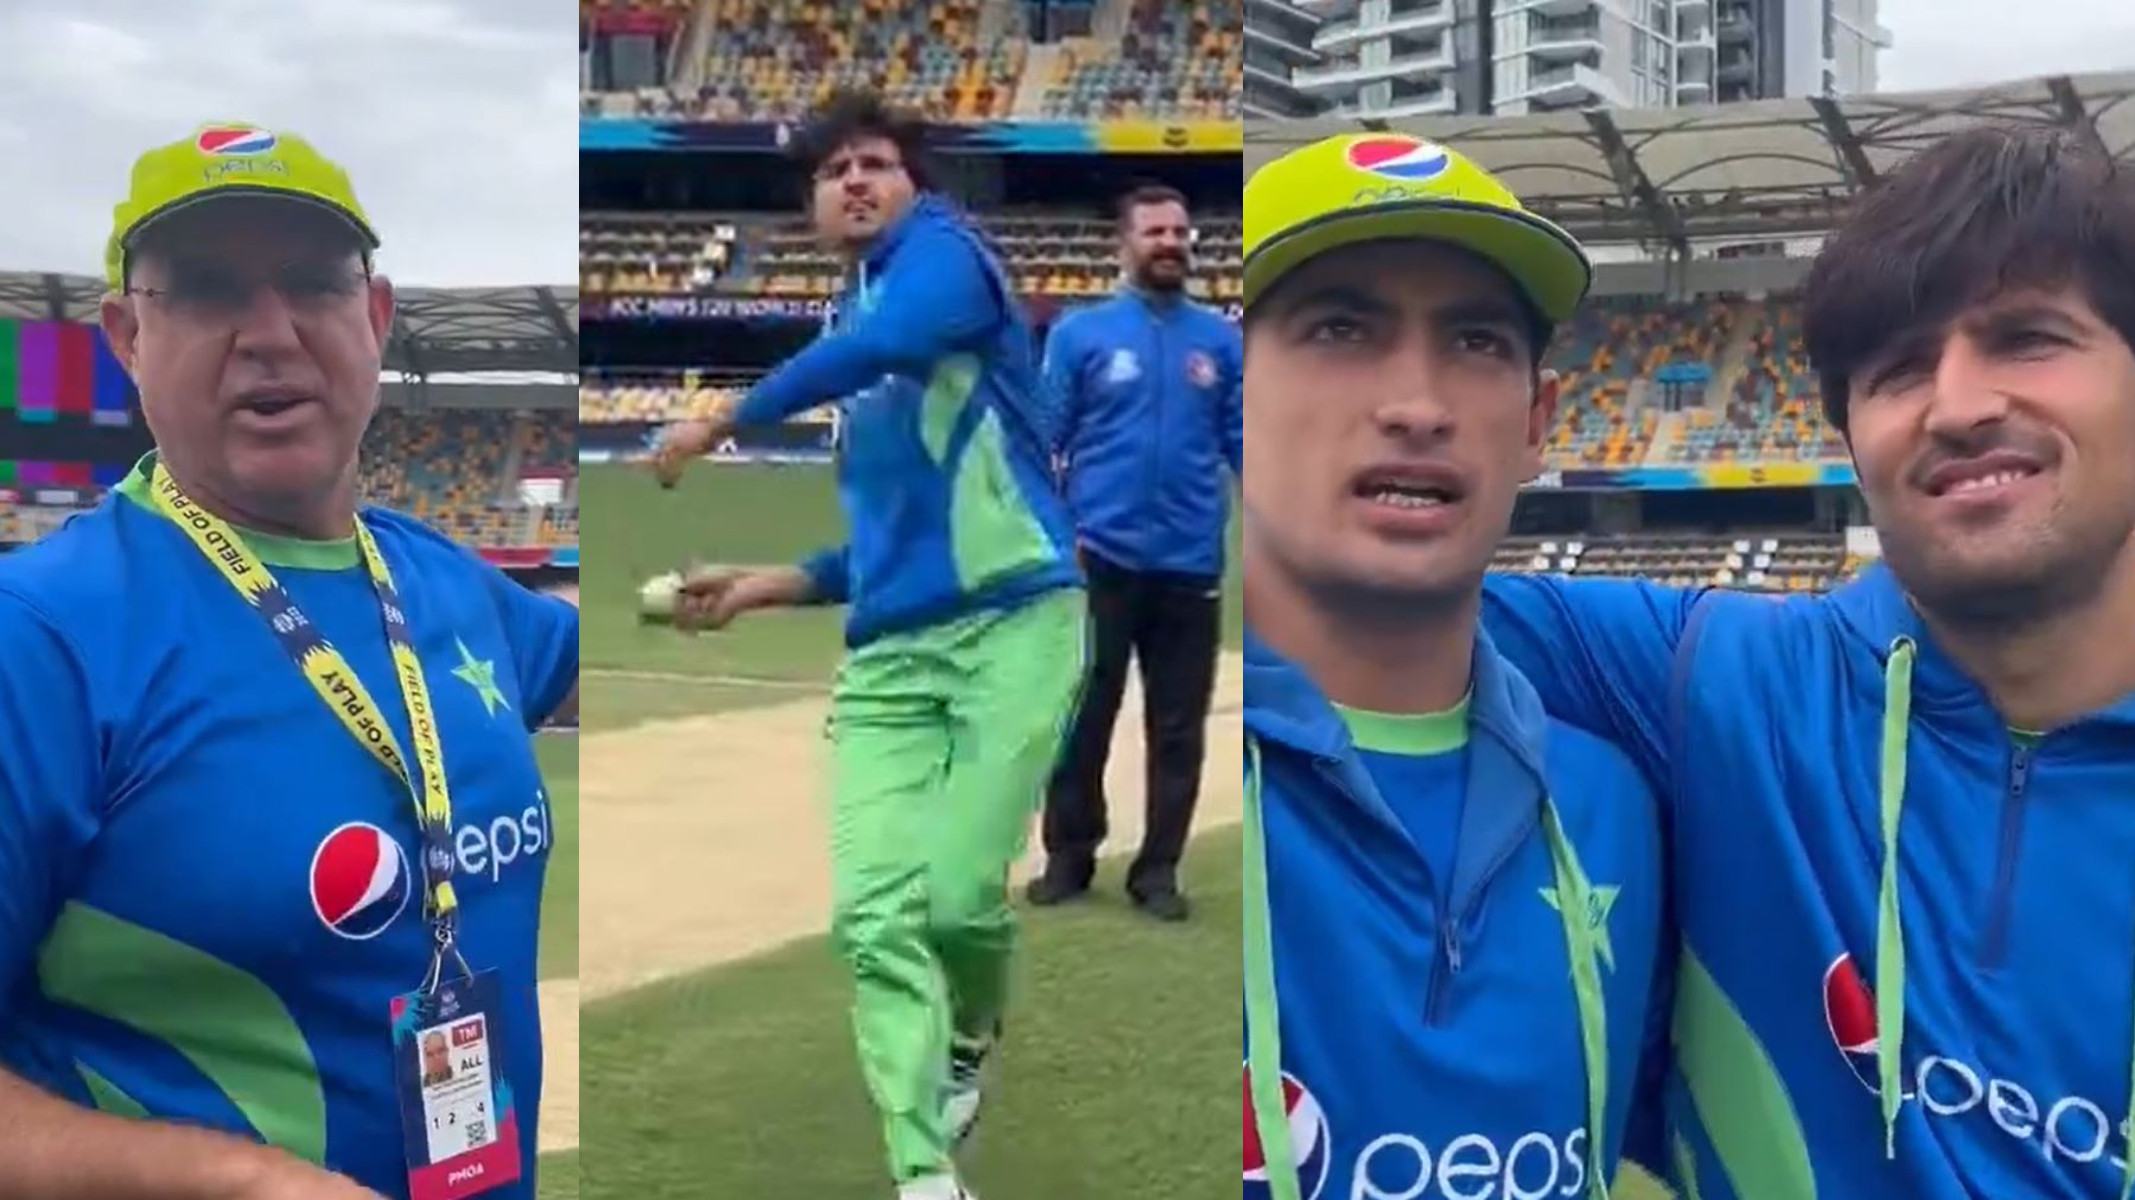 T20 World Cup 2022: WATCH- Hayden offers $100 to Naseem and Wasim Jr for a throw challenge; Wasim tries but fails